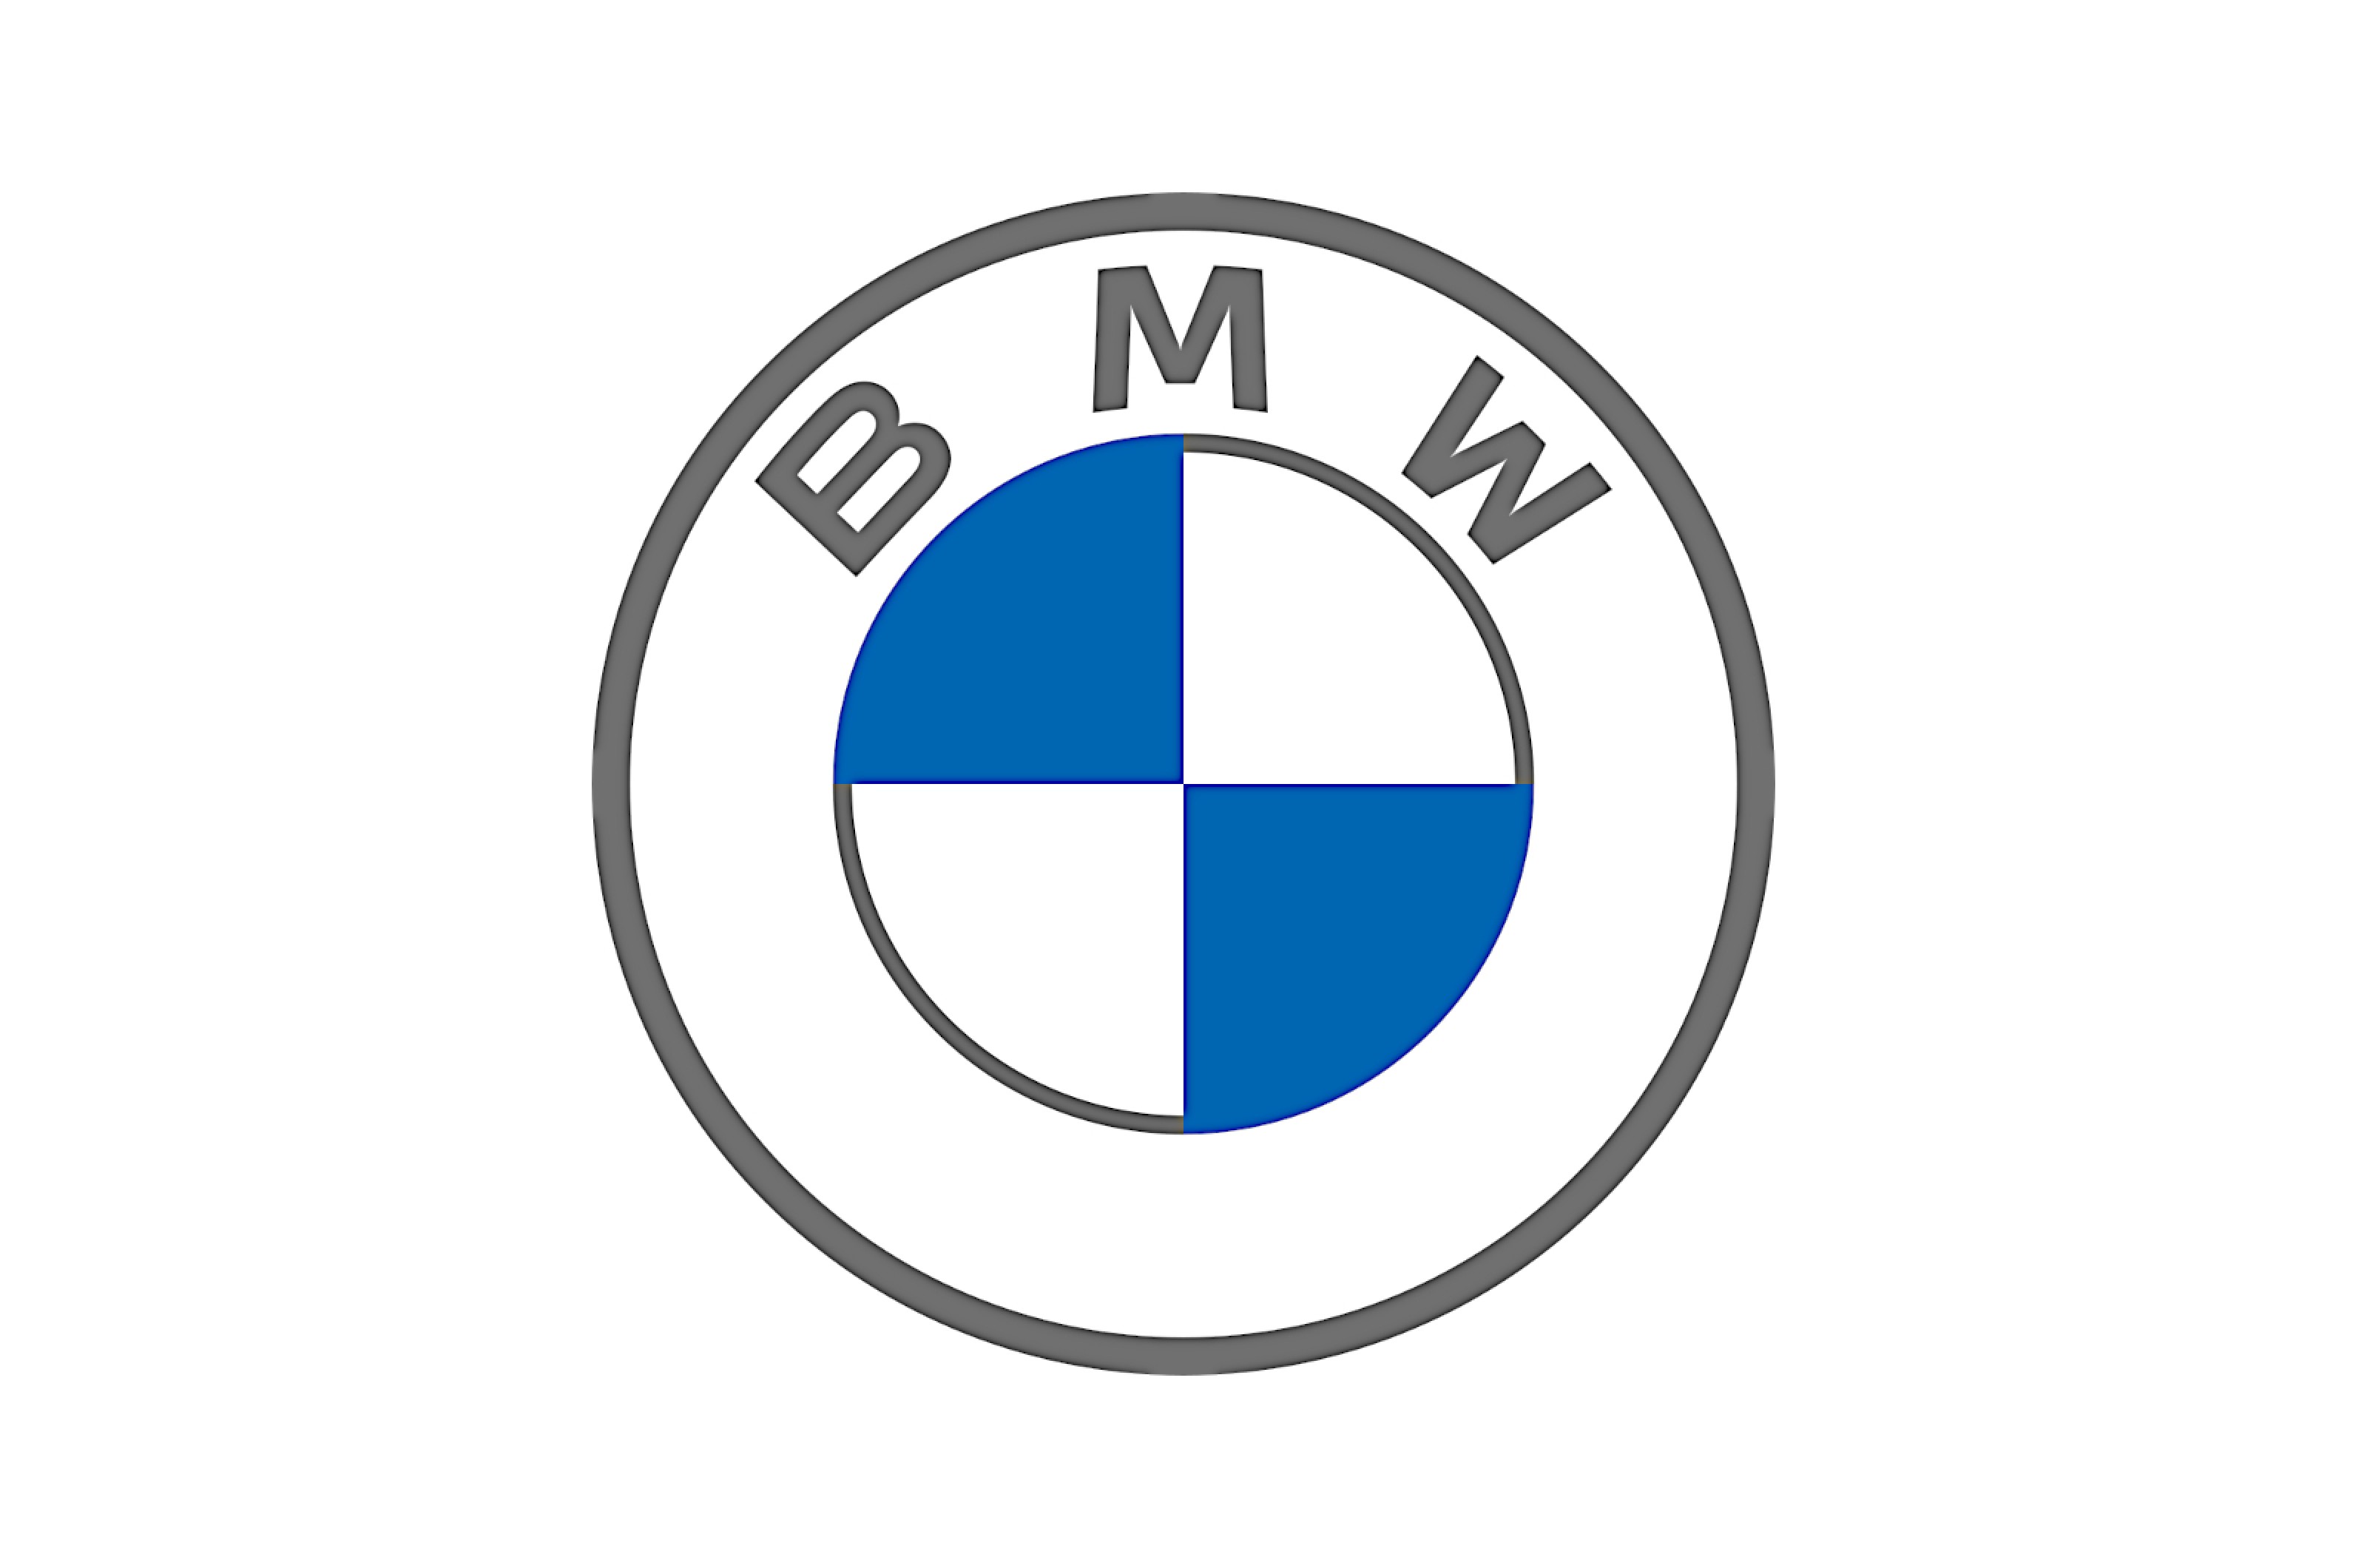 <p>The story that the BMW logo represents an airplane propellor has been told for nearly a century, but according to Fred Jakobs, Archive Director of BMW Group Classic, it isn’t true.</p>  <p>BMW evolved from German aircraft engine manufacturer Rapp, whose logo was a knight (in the sense of a chess piece) in the center of a circle with the company’s name at the top of the border.</p>  <p>For BMW’s purposes, the name was obviously changed, and the knight was replaced with four quadrants, two of them white and the others light blue. These are the colors of the Bavarian flag, and strictly speaking they are in the wrong order, to satisfy the trademark regulations of 1917.</p>  <p>Beyond question, the badge does look a bit like a propellor, and in fact BMW emphasized this by superimposing it on the props of two planes pictured in an advertisement published in 1929 (and did so again at least once, in 1942). The company knew the logo’s propellor origin story was inaccurate, but Jakobs says it “made little effort to correct the myth” for a long time.</p>